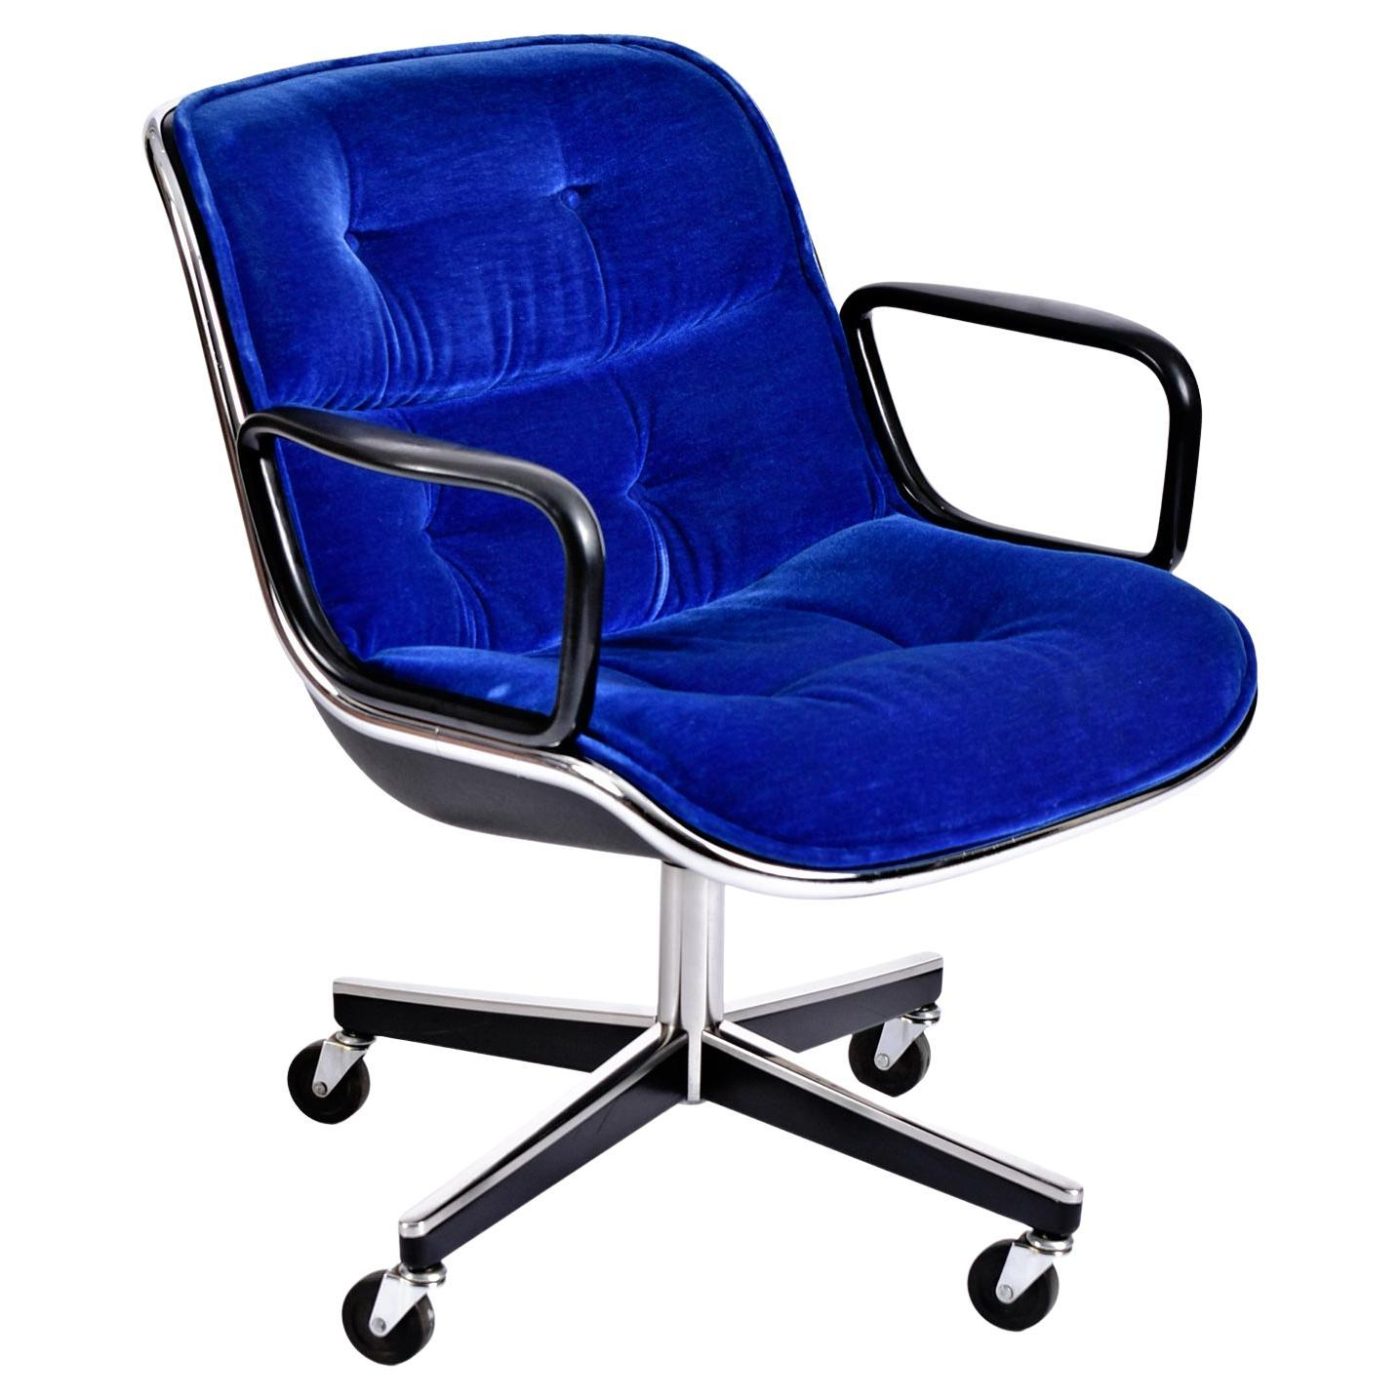 A royal-blue Charles Pollock for Knoll Executive chair, offered by Furnish Me Vintage